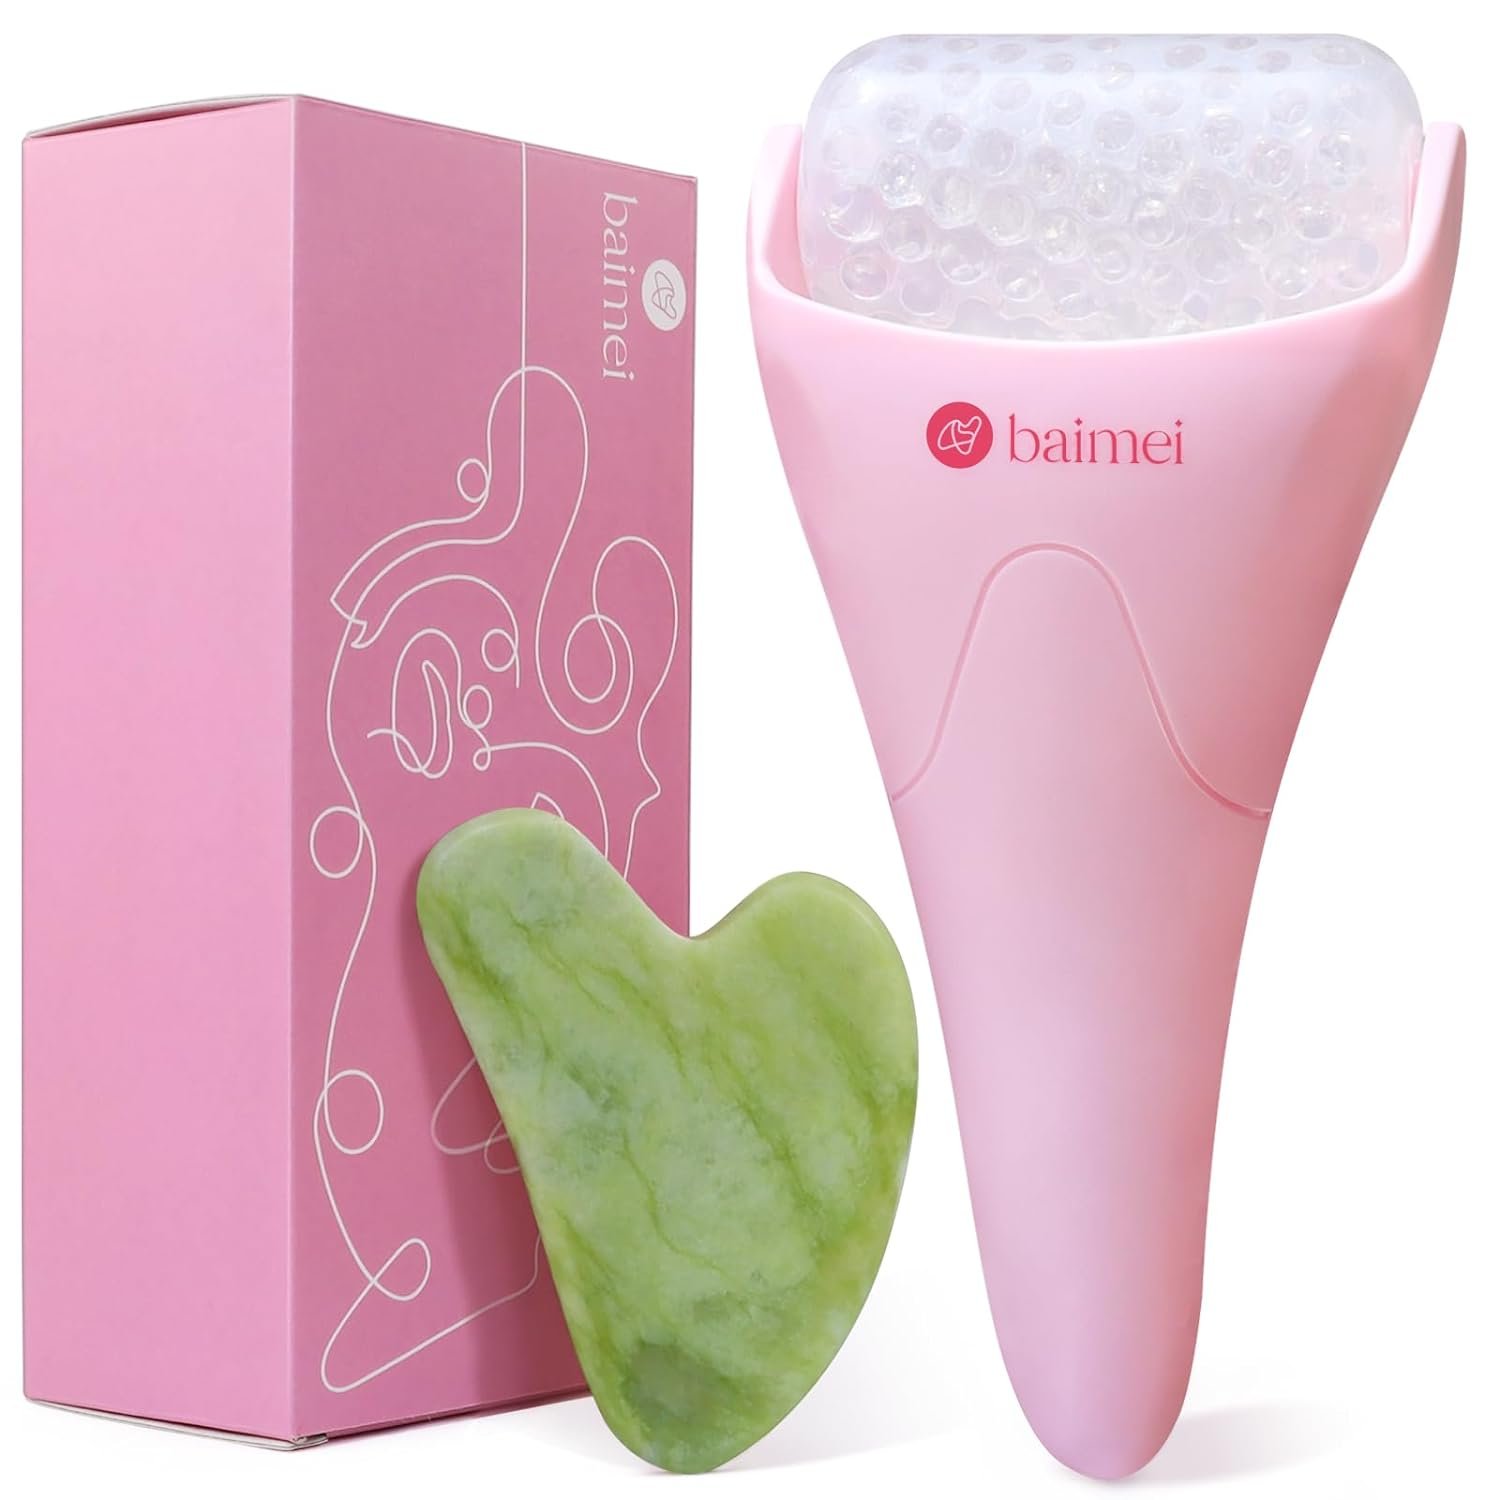 BAIMEI Ice Roller and Gua Sha Facial Tools, Skin Care Tools for face Reduces Puffiness Migraine Pain Relief, Self Care Gift for Men Women - Pink